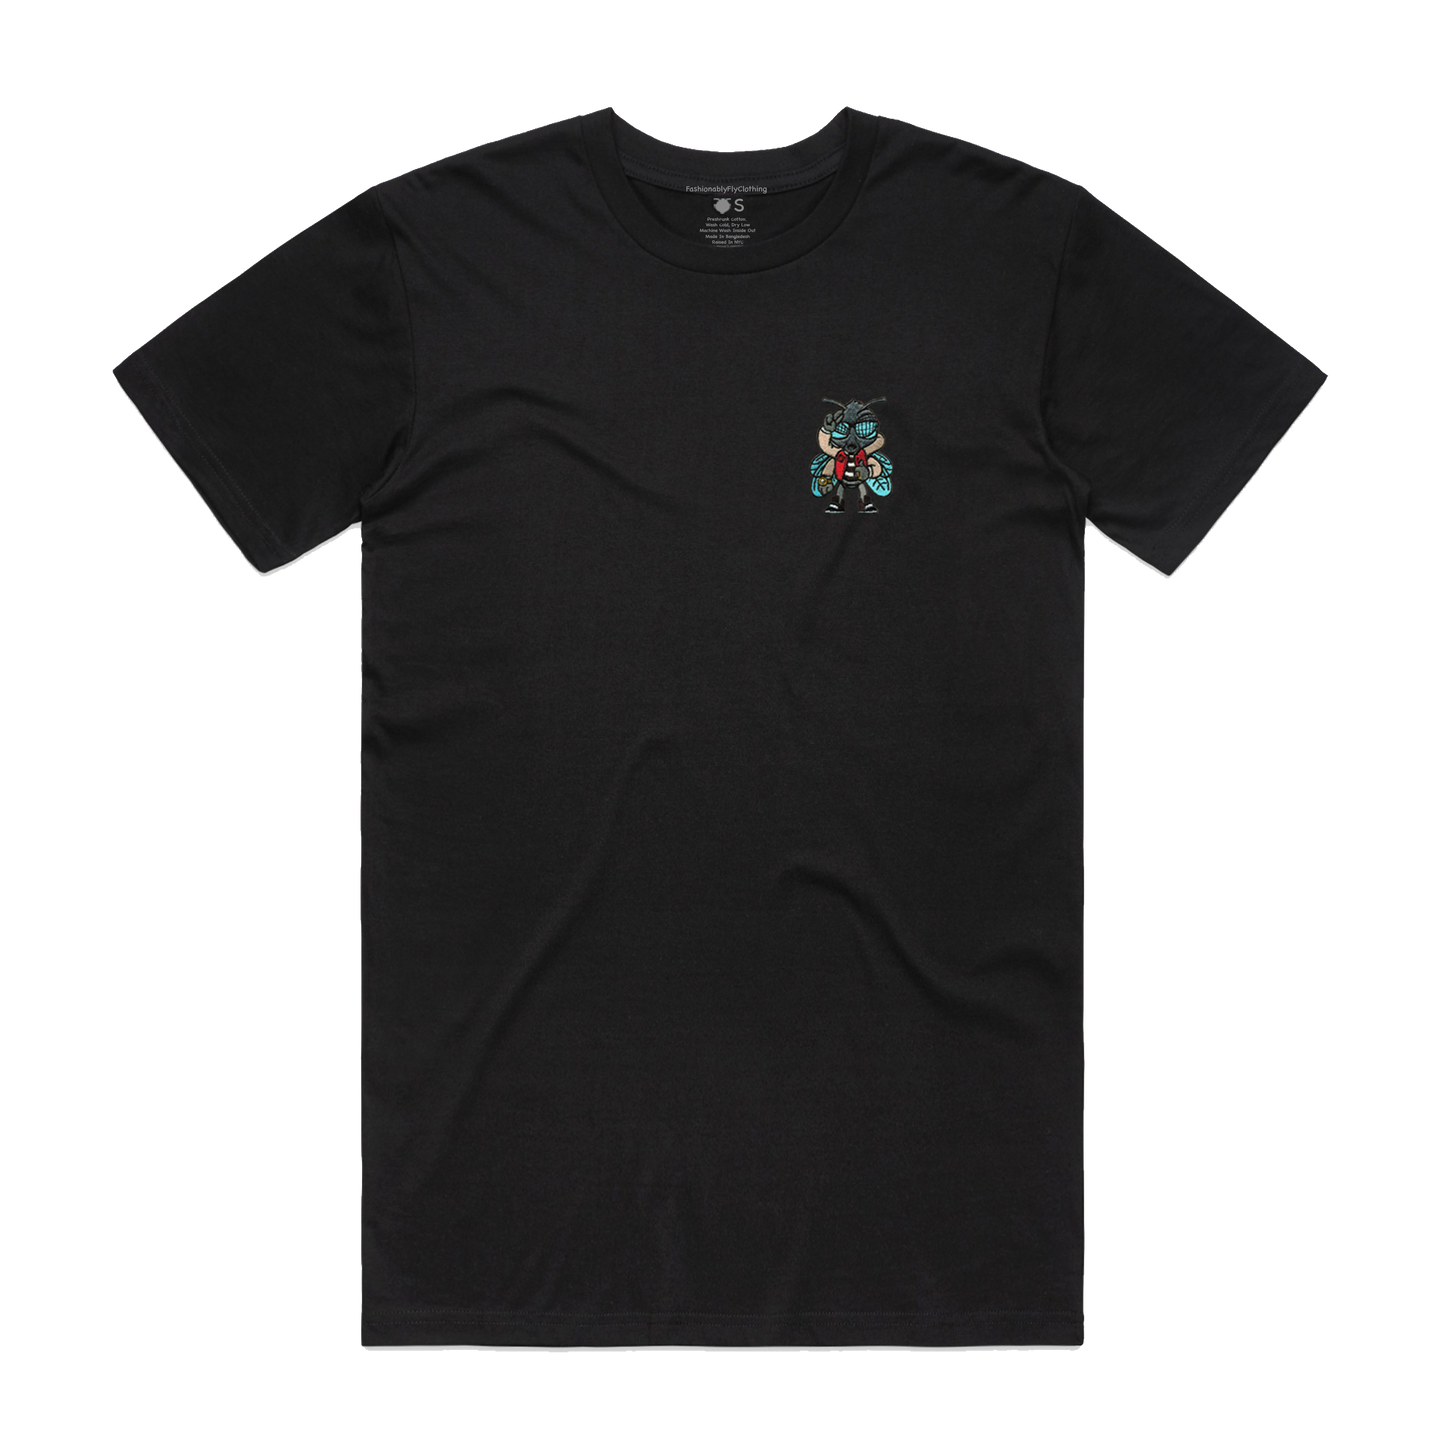 Fly Guy Embroidered Patch Unisex T-Shirt - Black